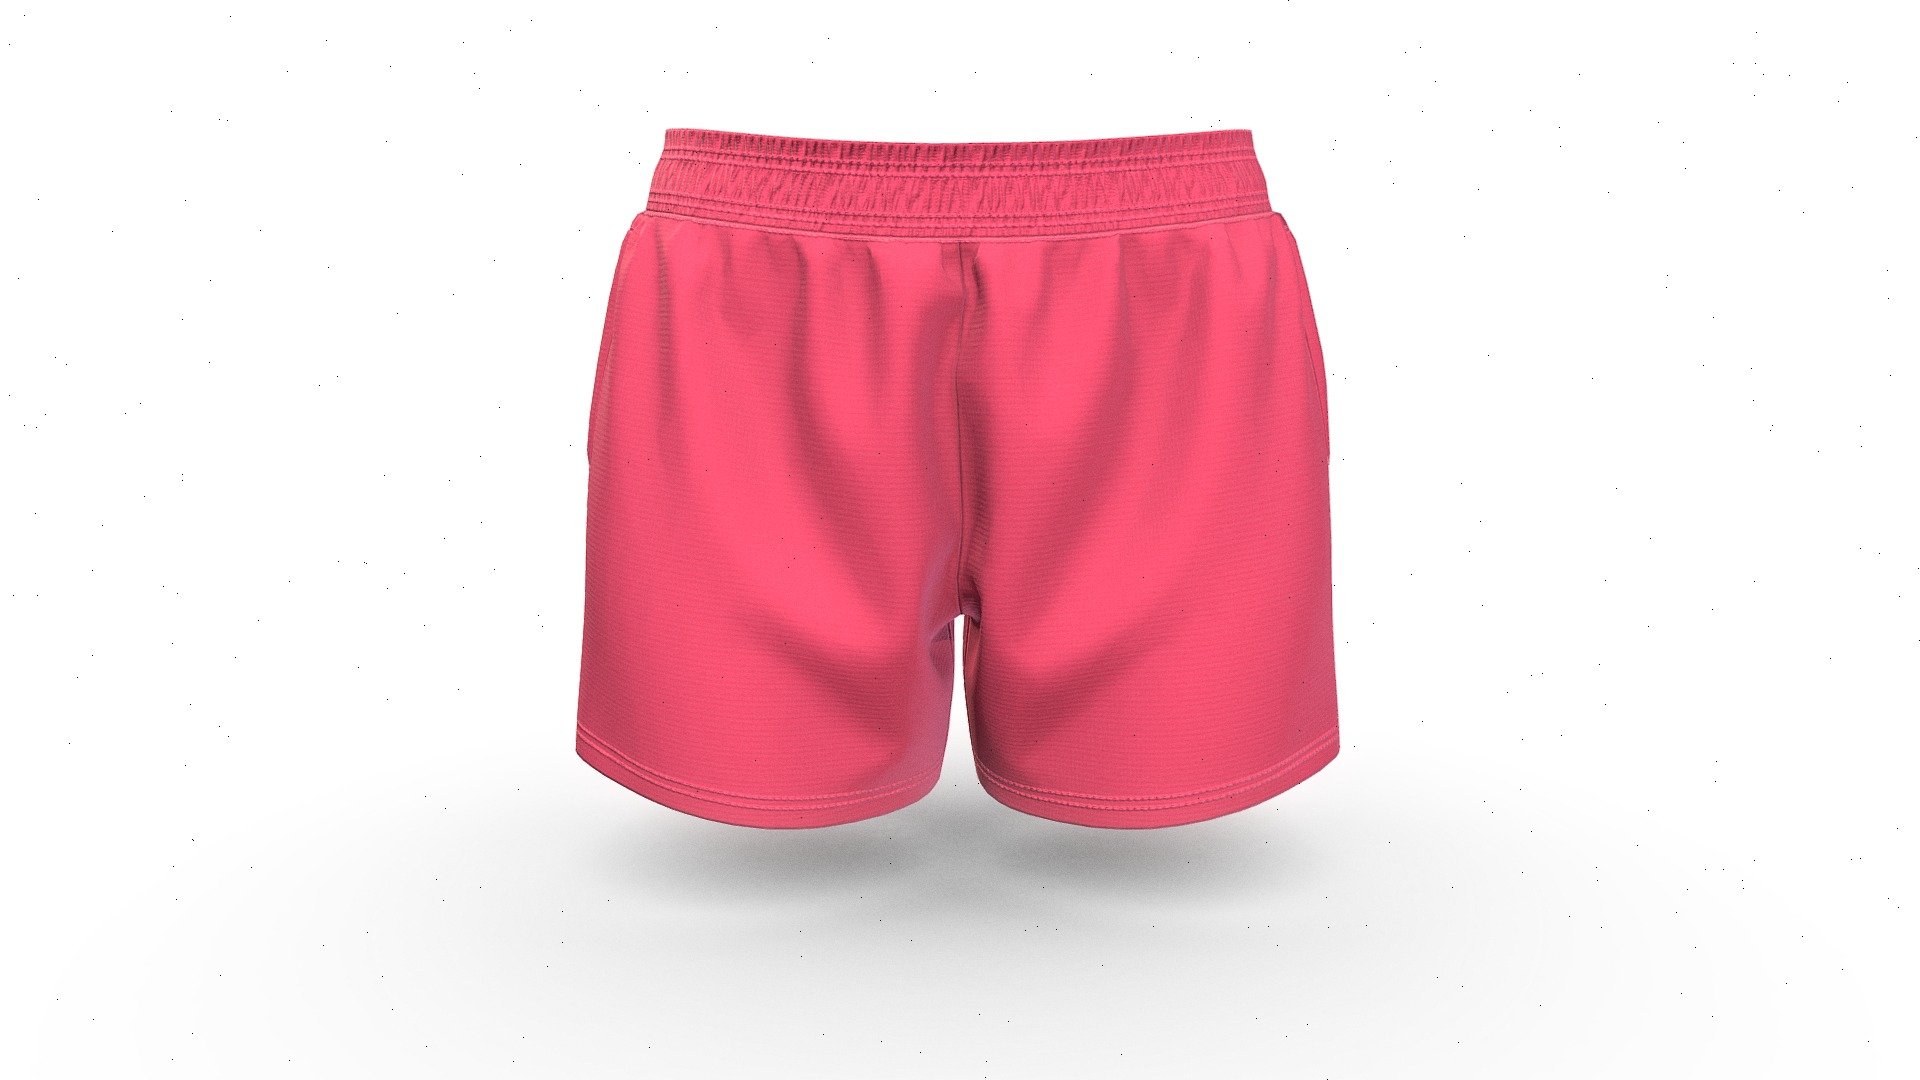 Women Sport Short
Version V1.0

Realistic high detailed Women Shorts with high resolution textures. Model created by our unique processing &amp; Optimized for 3D web and AR / VR

Features

Optimized &amp; NON-Optimized obj model with 4K texture included




Optimized for AR/VR/MR

4K &amp; 2K fabric texture and print details

Optimized model is 562KB

NON-Optimized model is 4.64MB

Knit fabric texture details included

GLB file in 2k texture size is 2.41MB

GLB file in 4k texture size is 11.0MB  (Game &amp; Animation Ready)

Suitable for web application configurator development.

Fully unwrap UV

The model has 1 material

Includes high detailed normal map

Unit measurement was inch

Triangular Mesh with 5k Vertices

Texture map: Base color, OcclusionRoughnessMetallic(ORM), Normal

For more details or custom order send email: hello@binarycloth.com


Website:binarycloth.com - Women Sport Short - Buy Royalty Free 3D model by BINARYCLOTH (@binaryclothofficial) 3d model